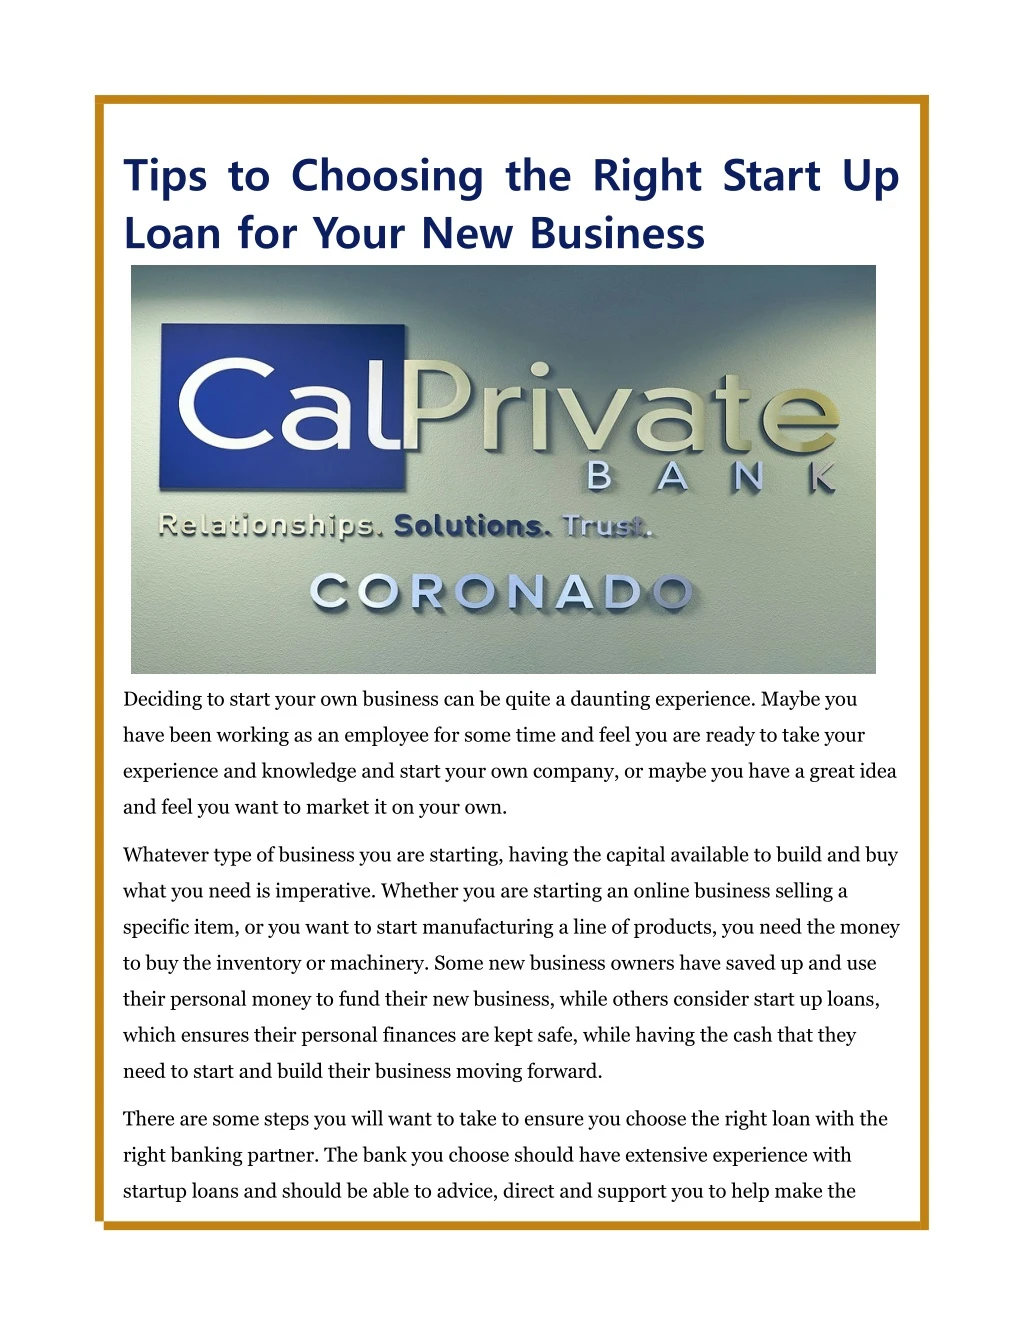 tips to choosing the right start up loan for your